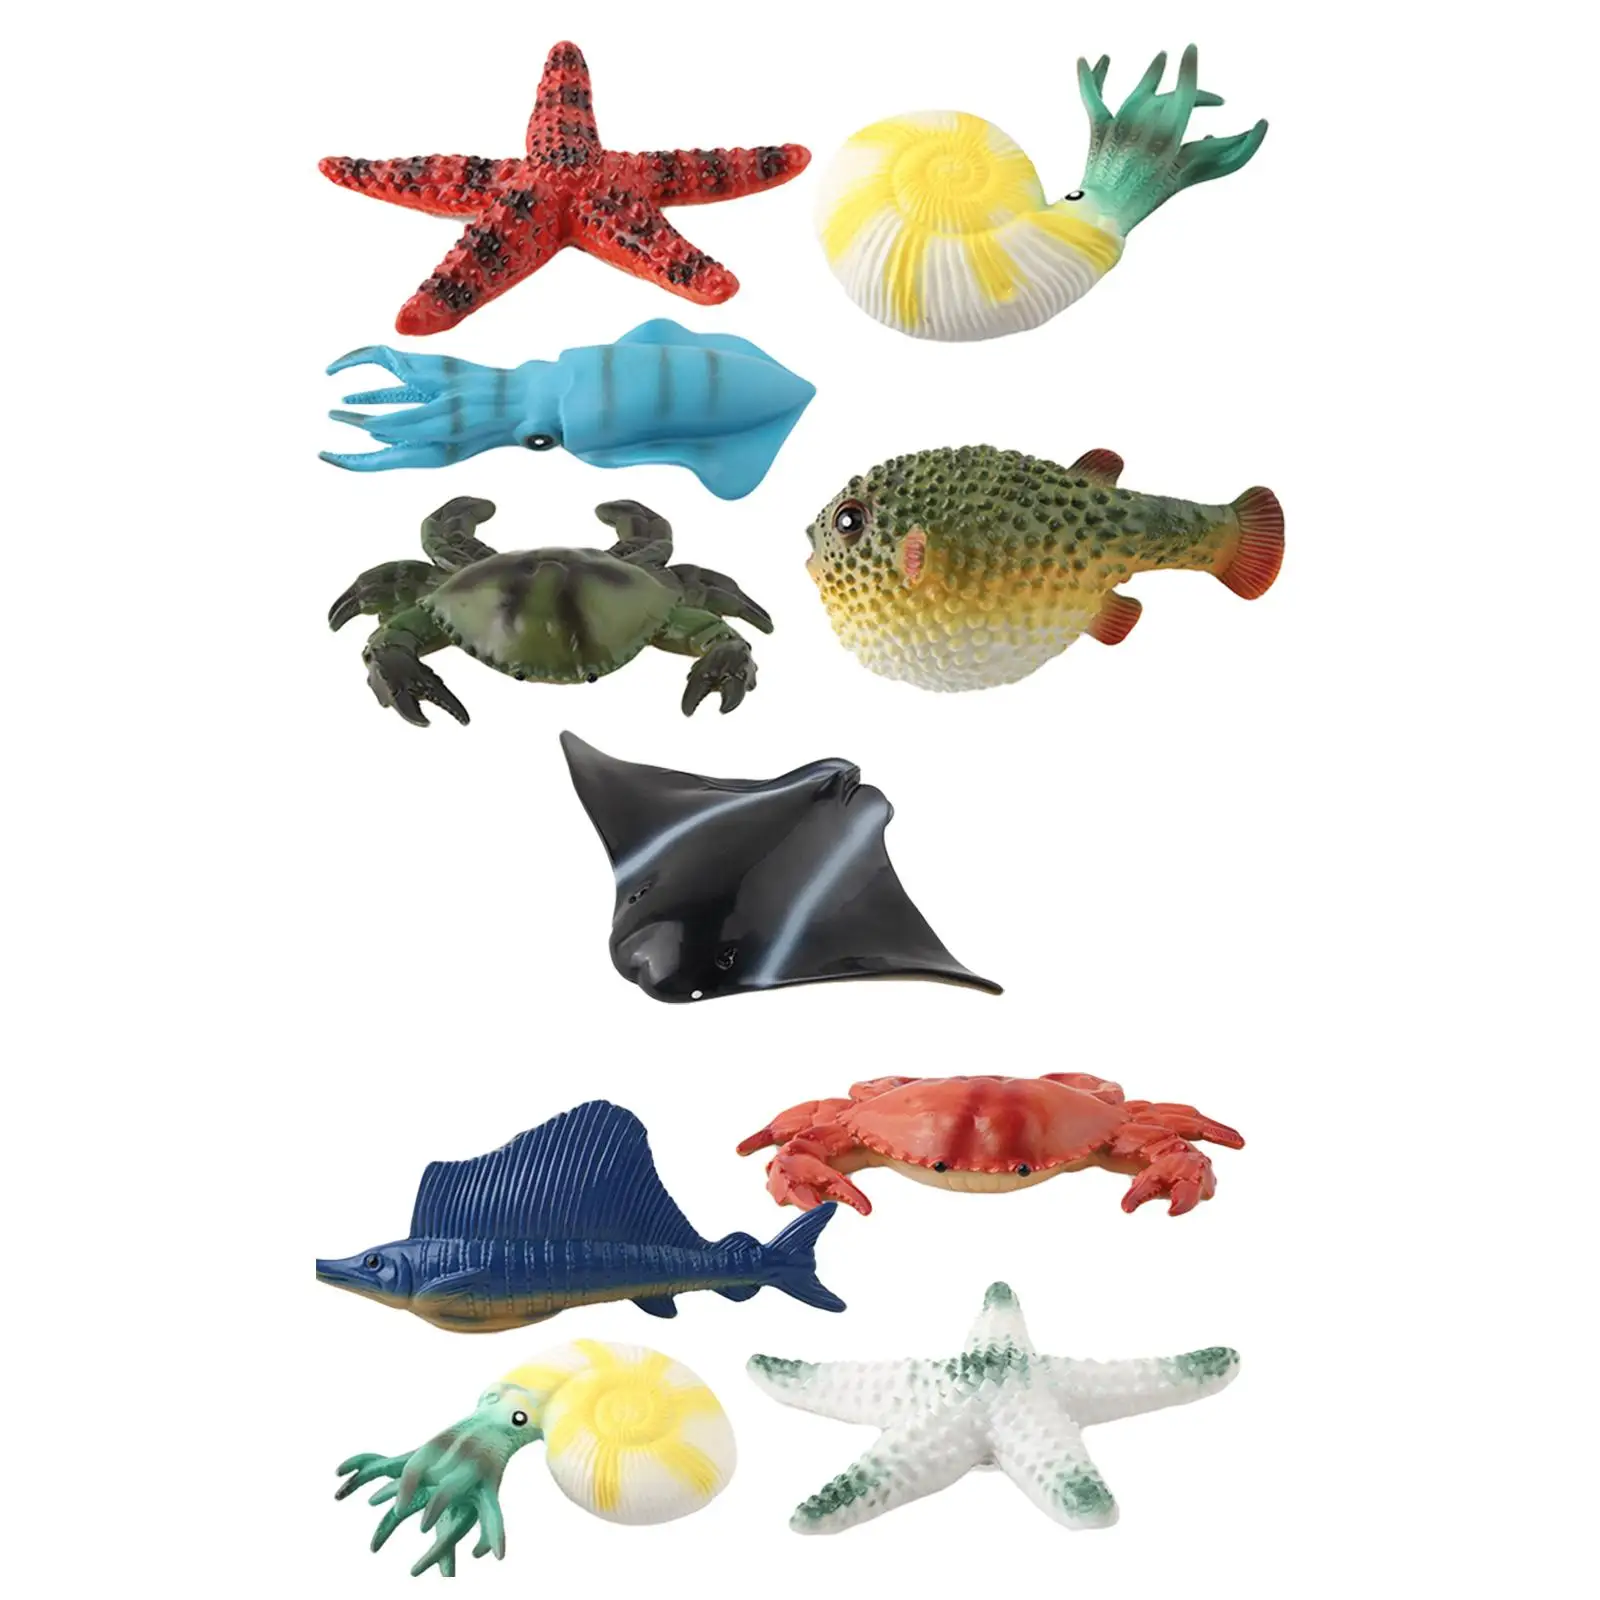 5 Pieces Marine Animal Model Manta Ray Squid Educational Toys Tools for Kids